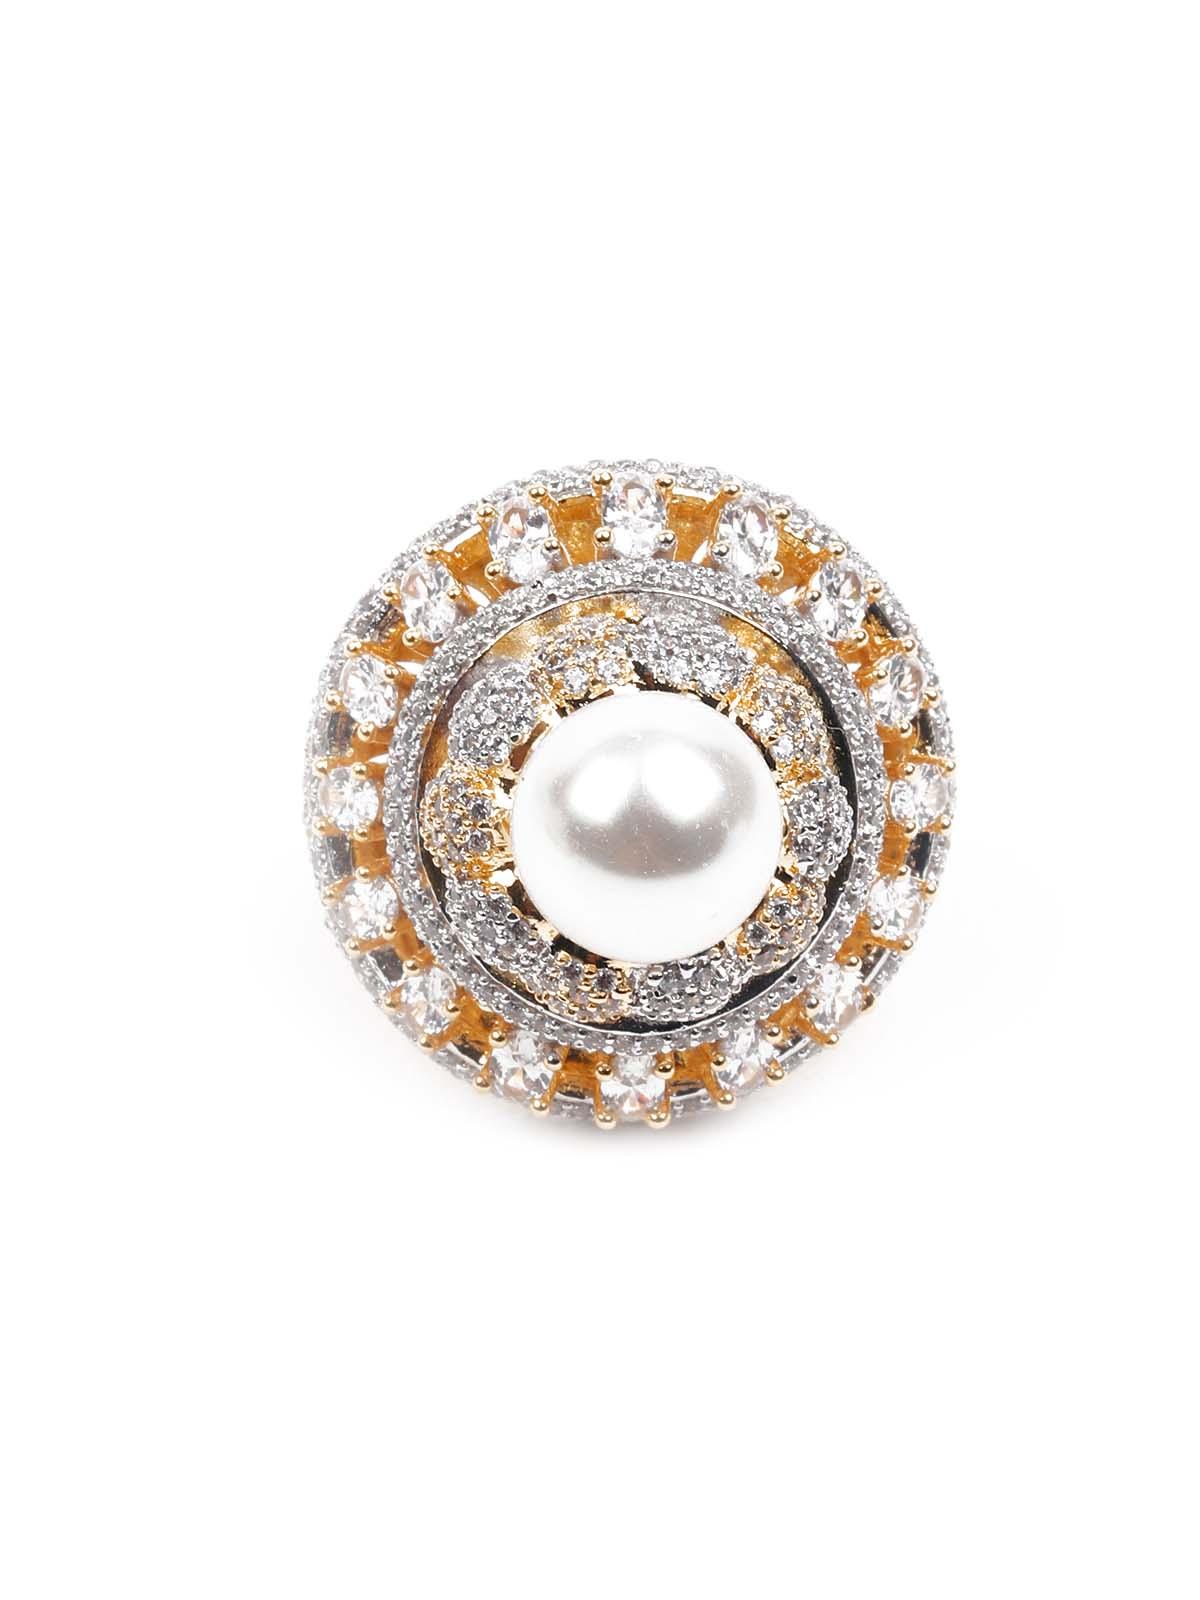 Women's Stunning Gold And Diamond Ring - Odette